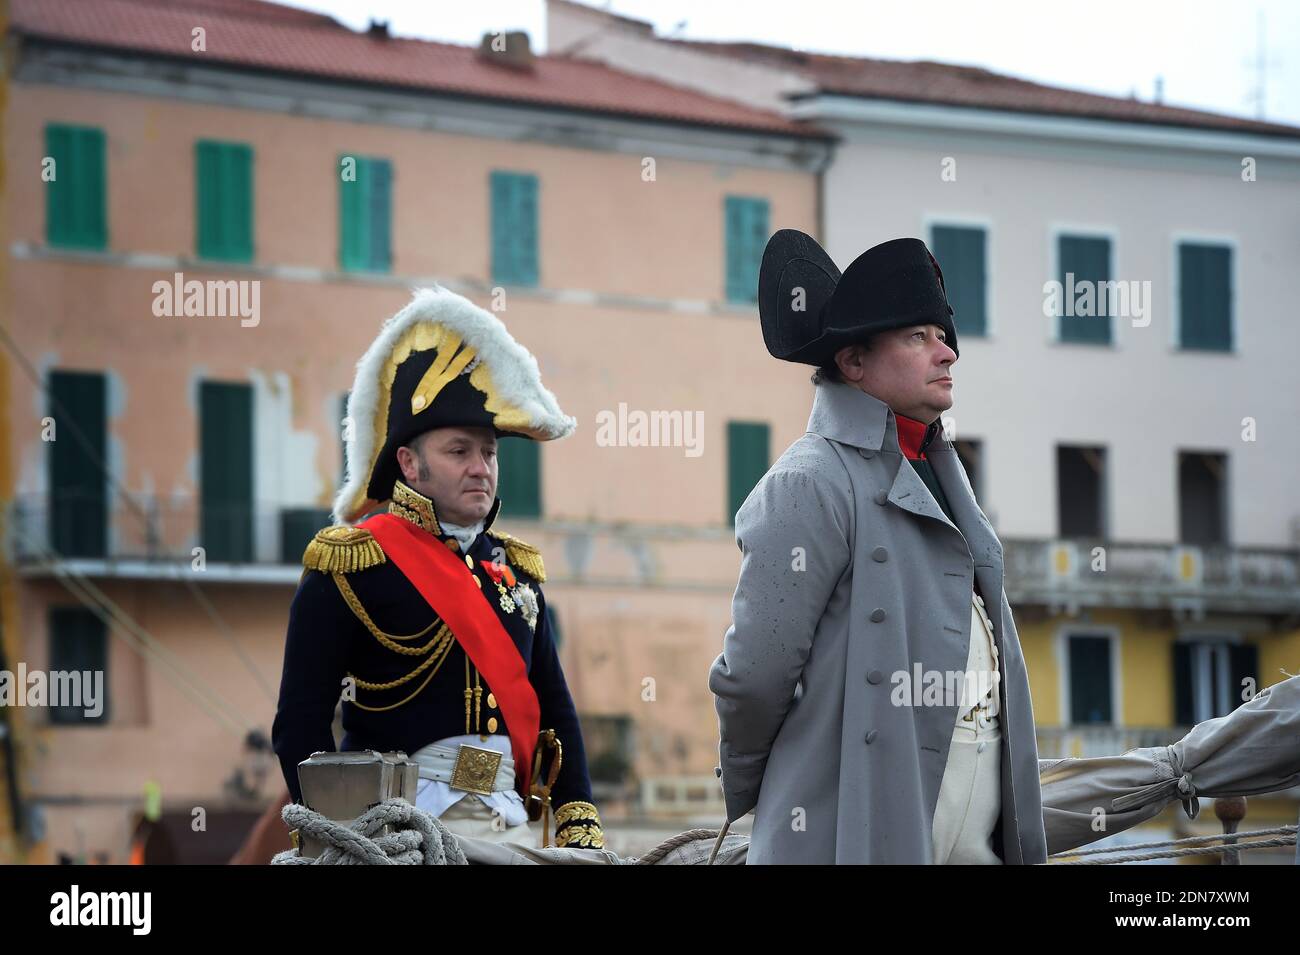 Italian enthusiast Roberto Colla, representing French Emperor Napoleon , stands on the ship 'Pandora' on February 22, 2015, in the harbour of Portoferraio on the island of Elba, Italy. The Italian island, where Napoleon was sent into exile in 1814, marks the 200th anniversary of the emperor leaving from Portoferraio and landing at the Golfe-Juan near Antibes,south of France, with enthusiast re-enacting the whole adventure. On February 28, 1814, British General Sir Neil Campbell realised with horror that his illustrious prisoner, Napoleon Bonaparte, had slipped away from the island of Elba. The Stock Photo